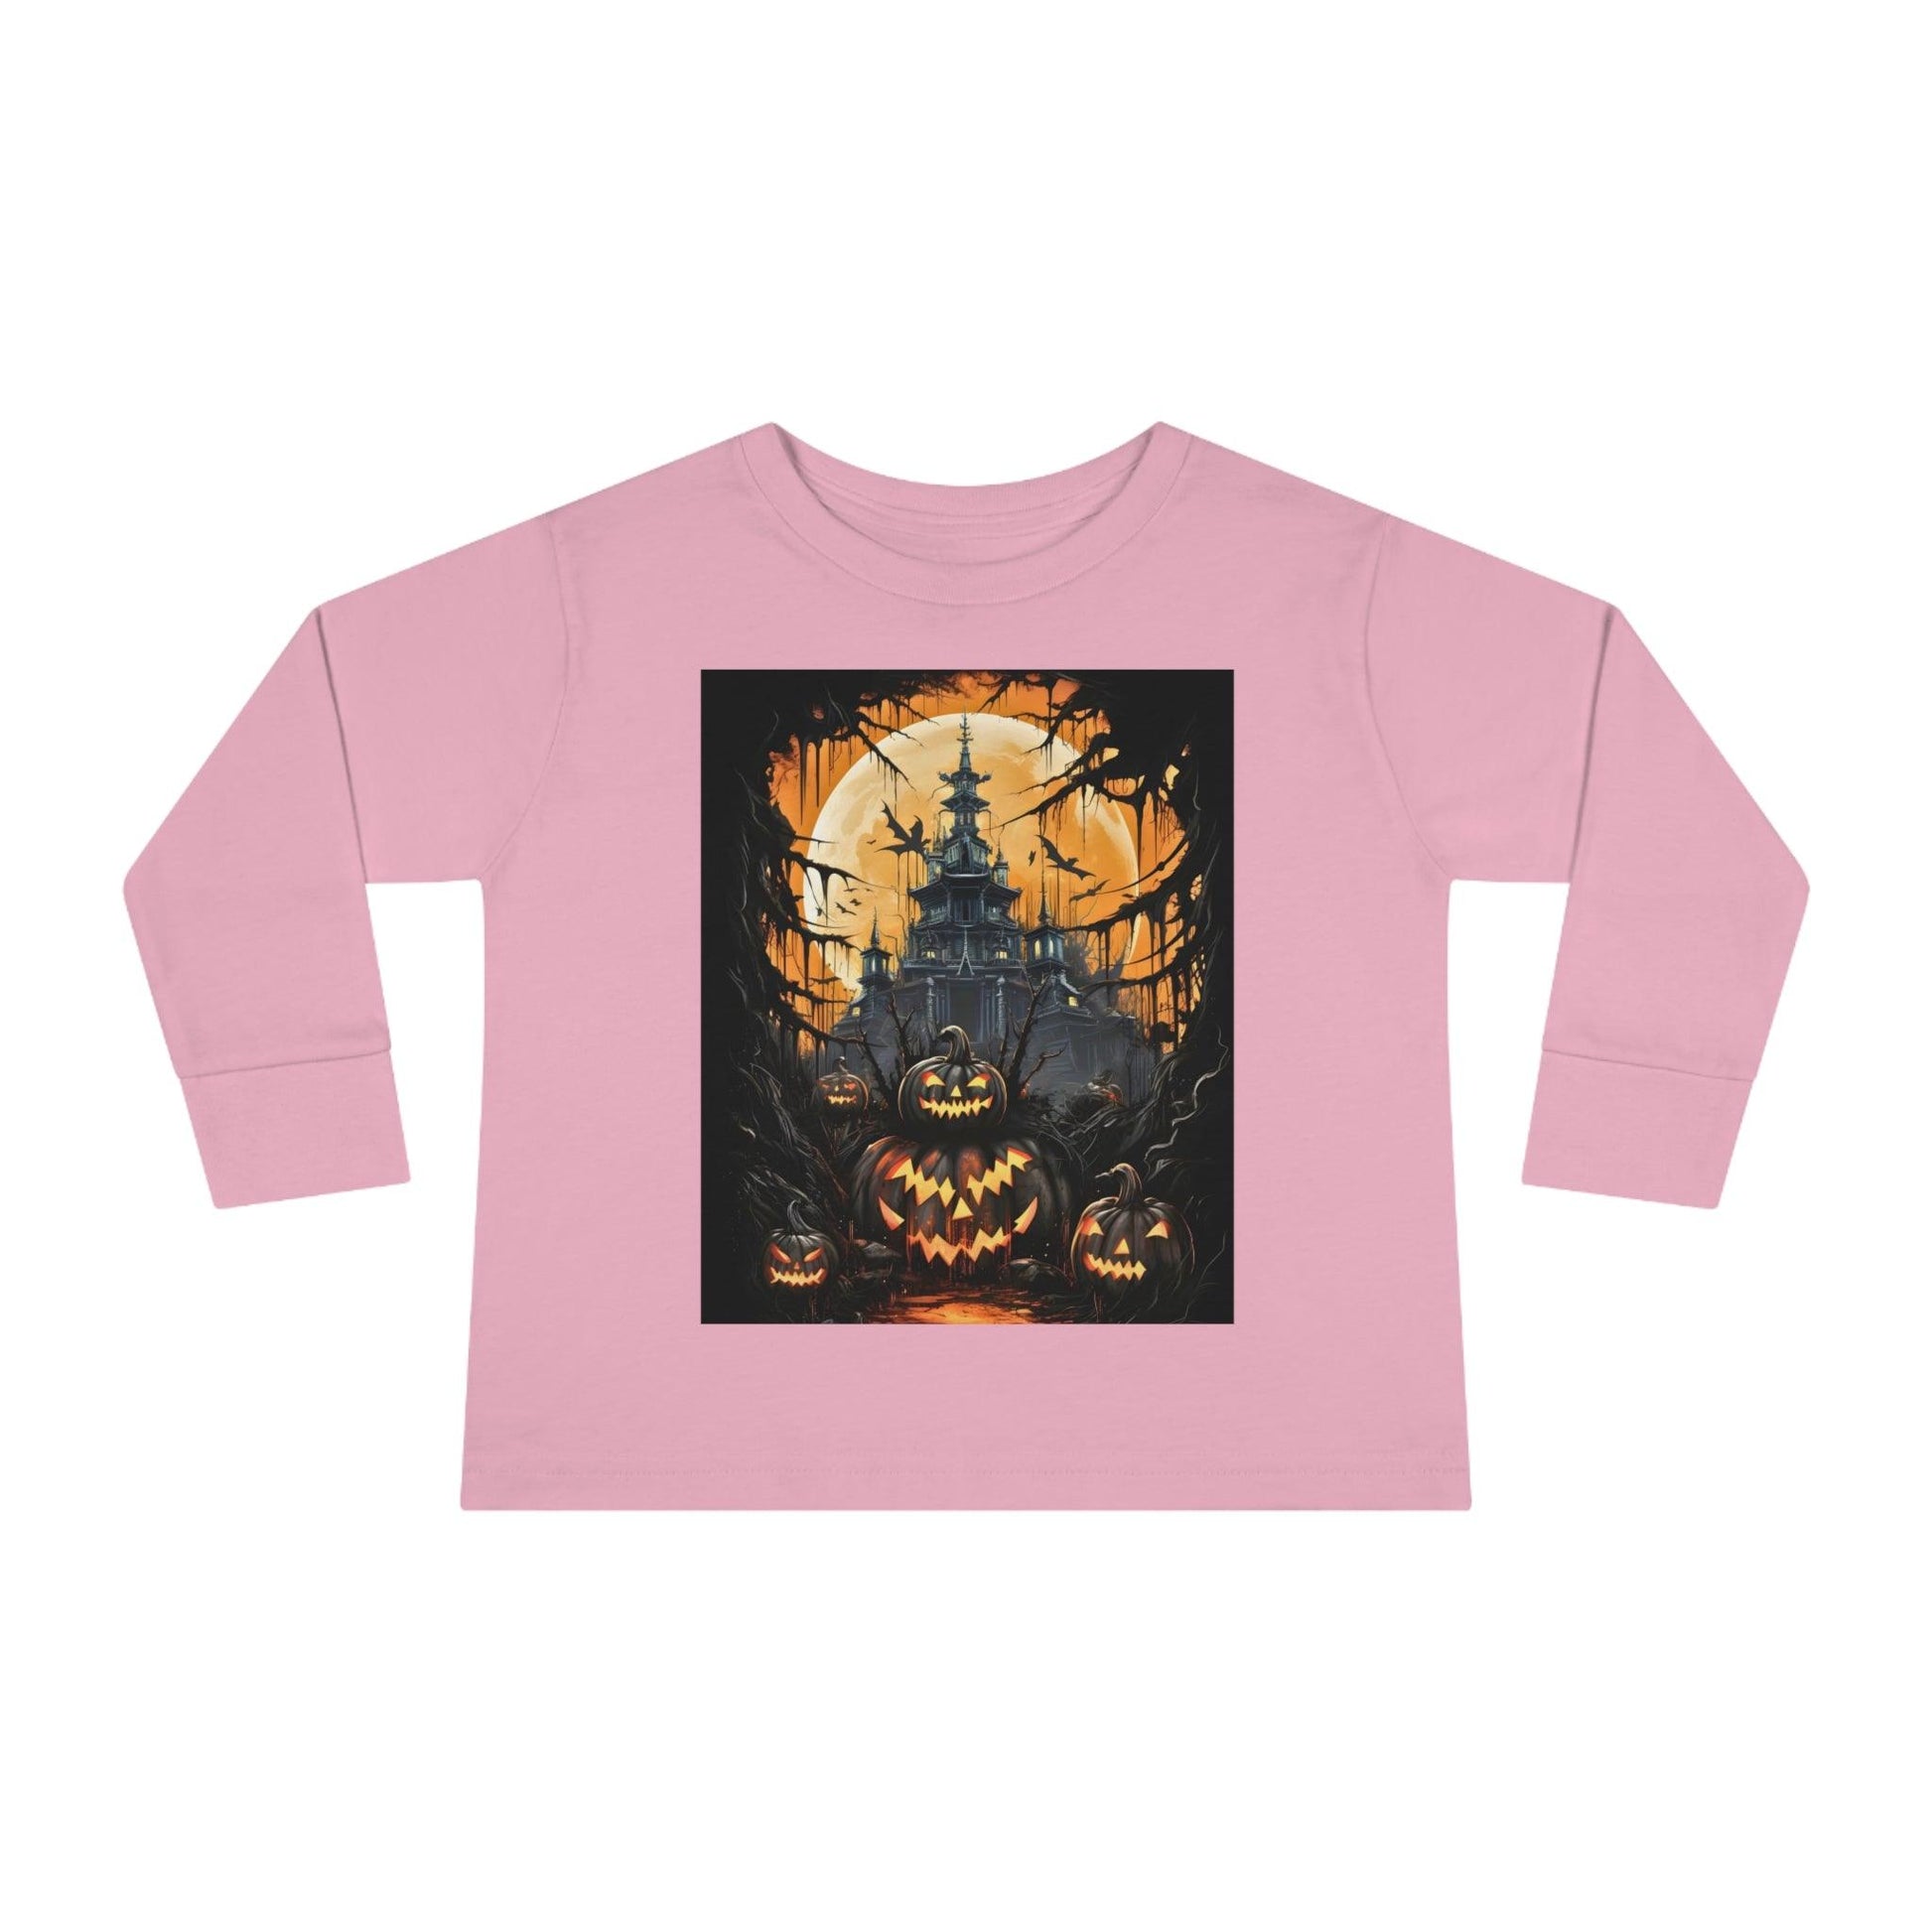 Kids Trick or Treat Outfit for Halloween Kids Jack O Lantern Shirt Kids Scary Faces Halloween Pumpkin Face Shirt Kids Halloween Shirt - Giftsmojo